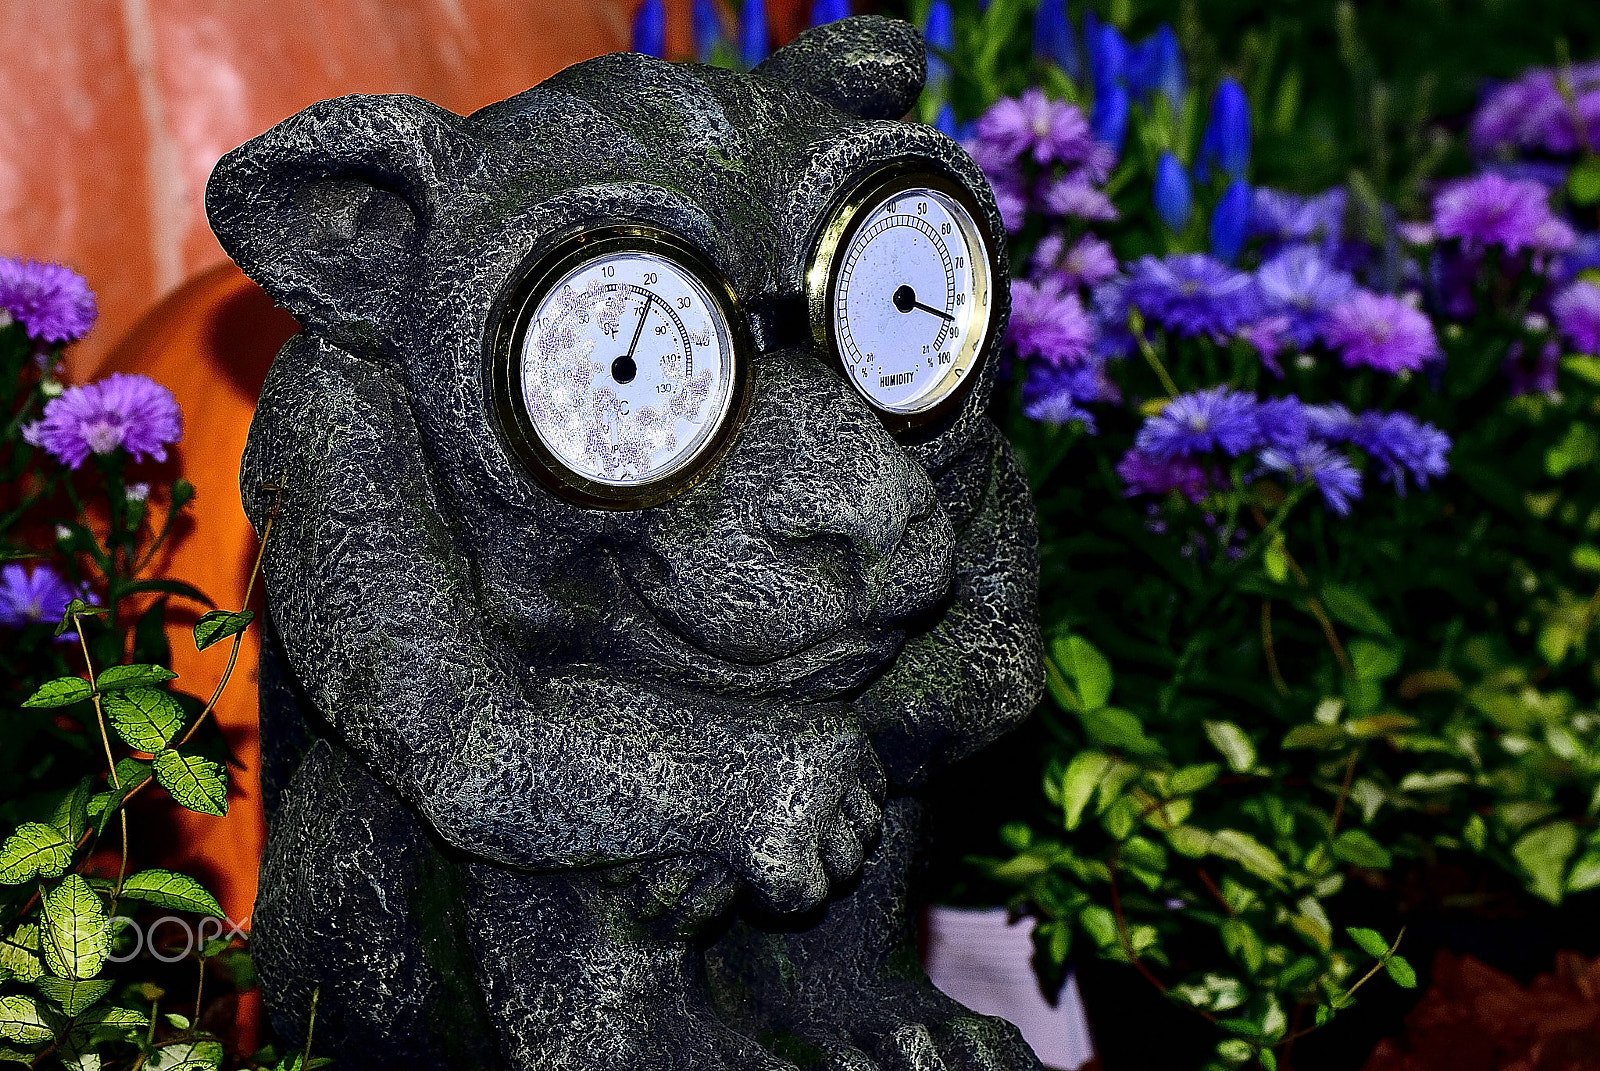 Nikon D200 sample photo. Thermometer and hygrometer goblin photography